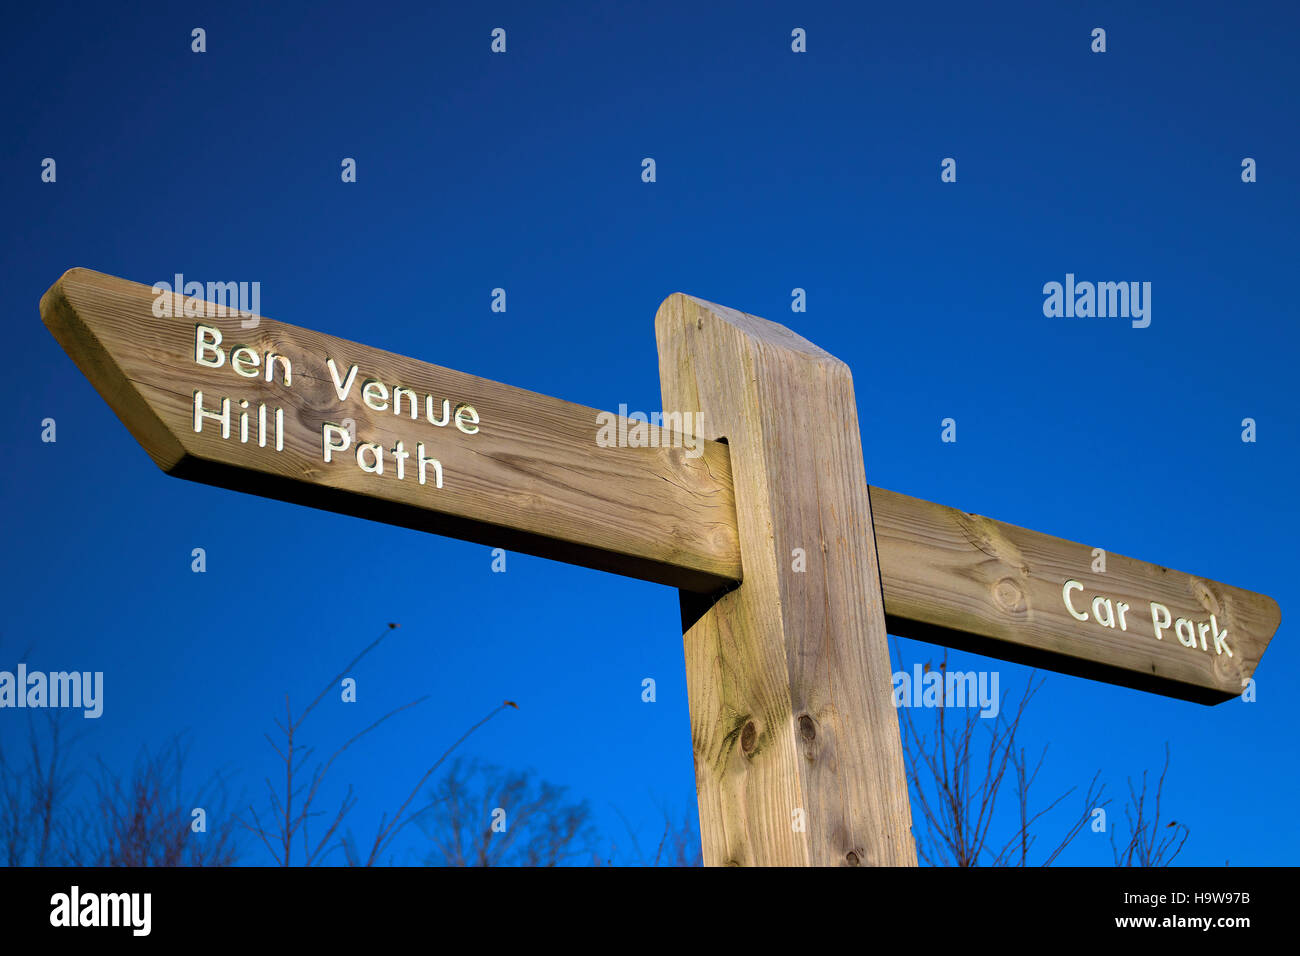 Ben Venue sign, Southern Highlands, Loch Lomond and the Trossachs National Park, Stirlingshire Stock Photo